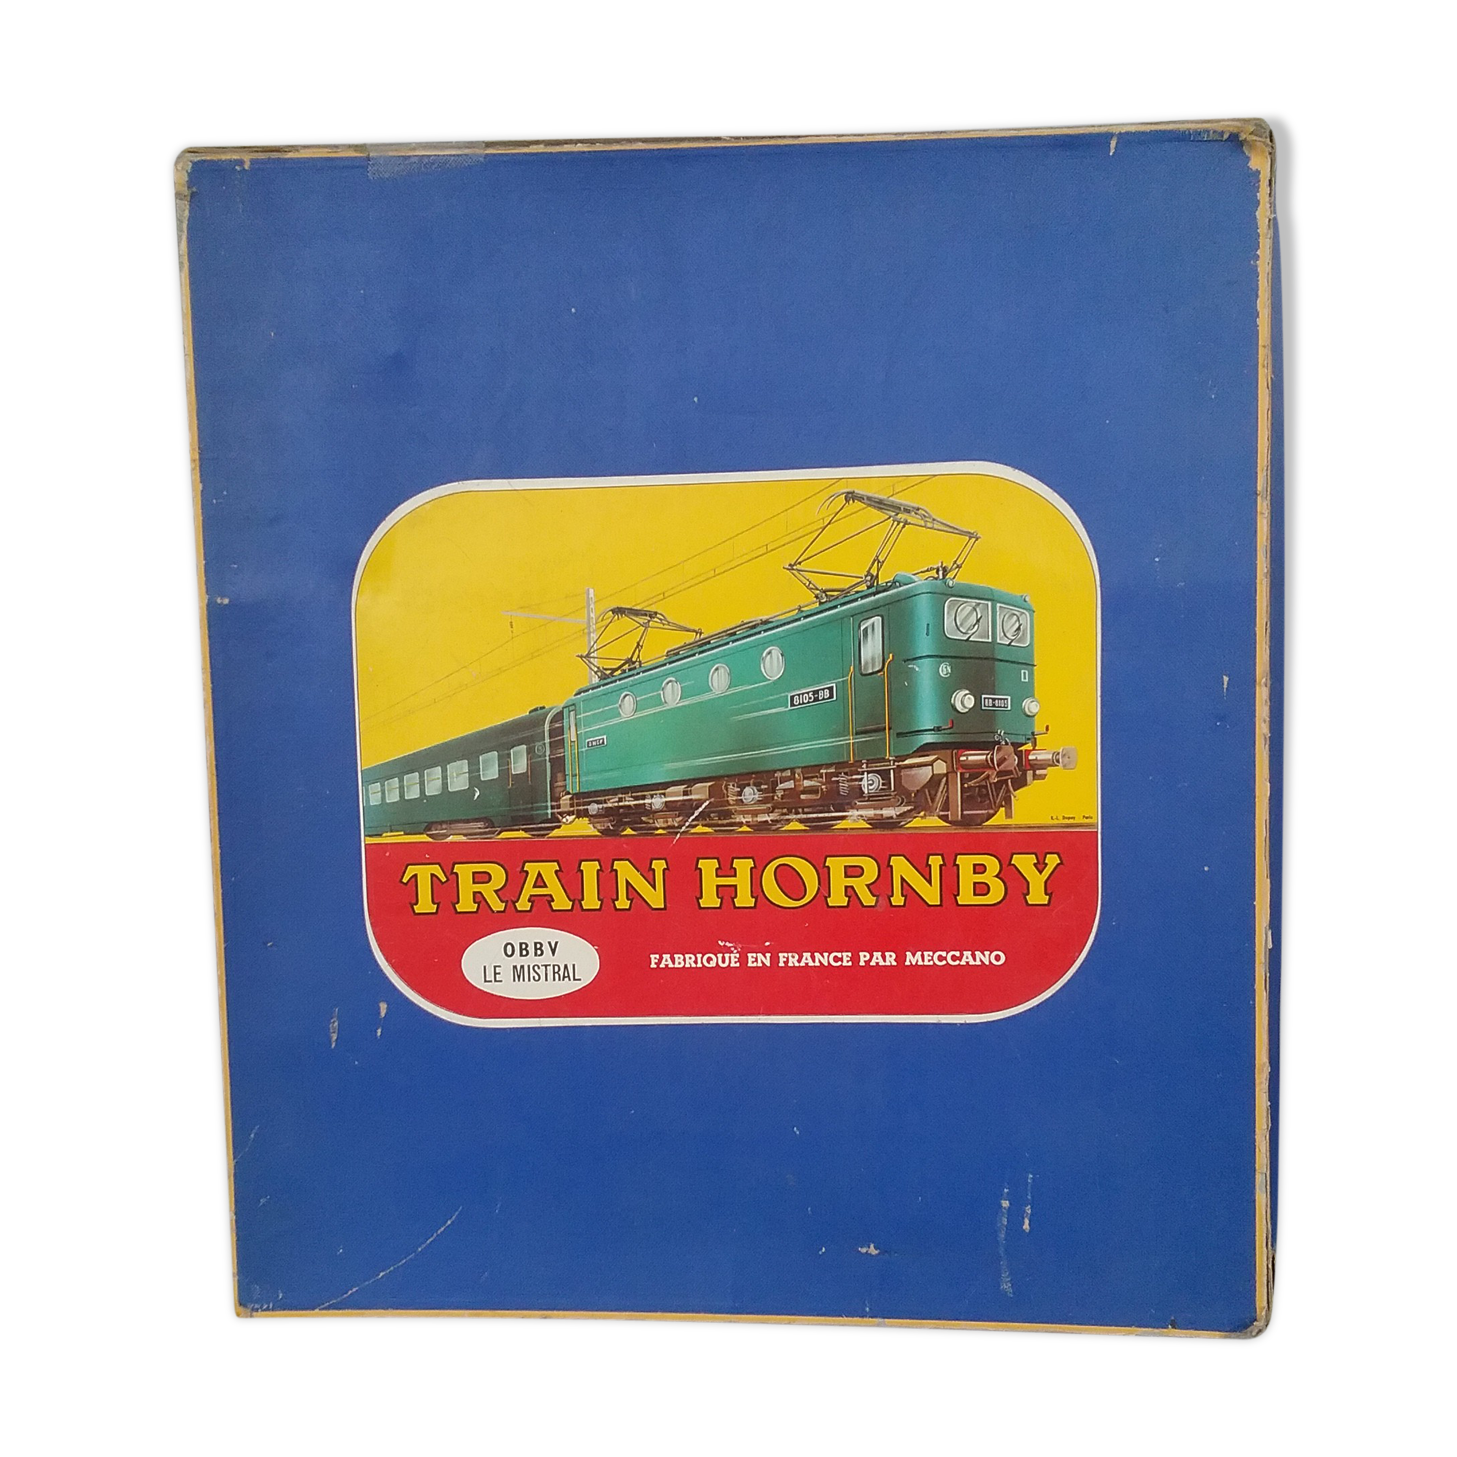 Production on Hornby trains at the Meccano Factory POSTER 